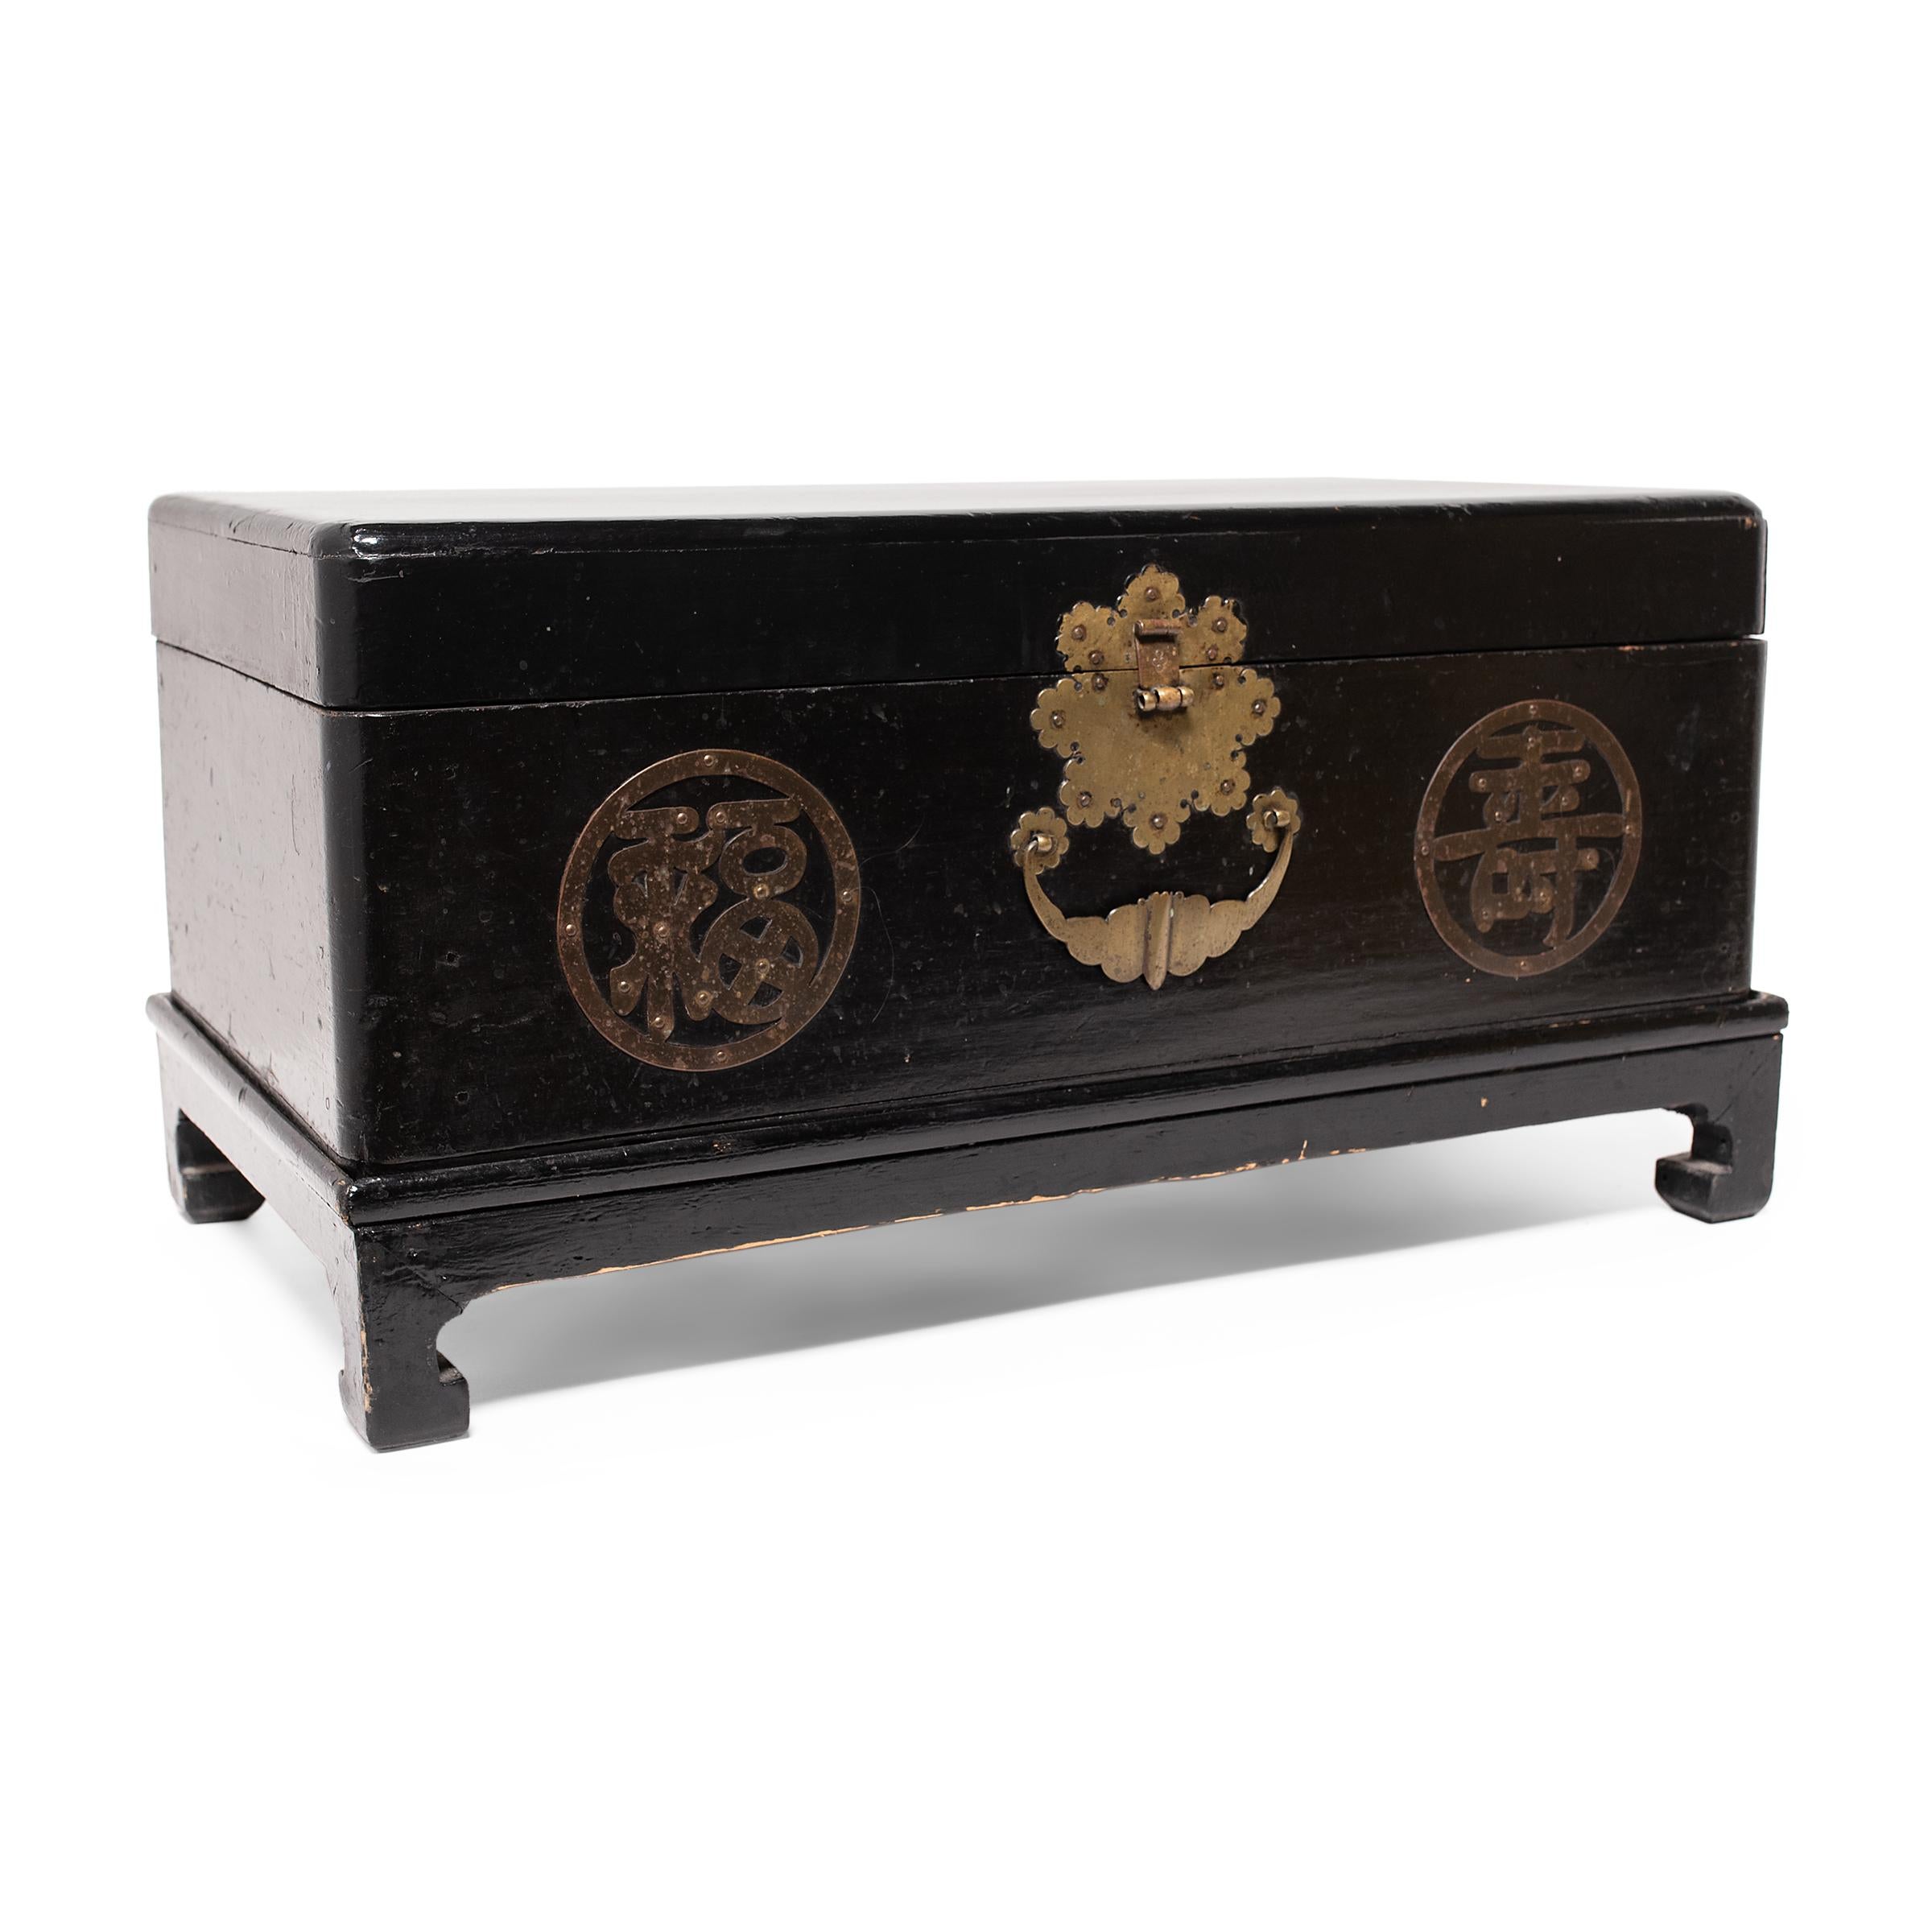 This low Korean wedding chest is cloaked in an all-over black lacquer finish, punctuated by decorative brass hardware on the front. Enclosed within round medallions, two brass characters offer blessings of luck (福) and longevity (寿). The lock plate